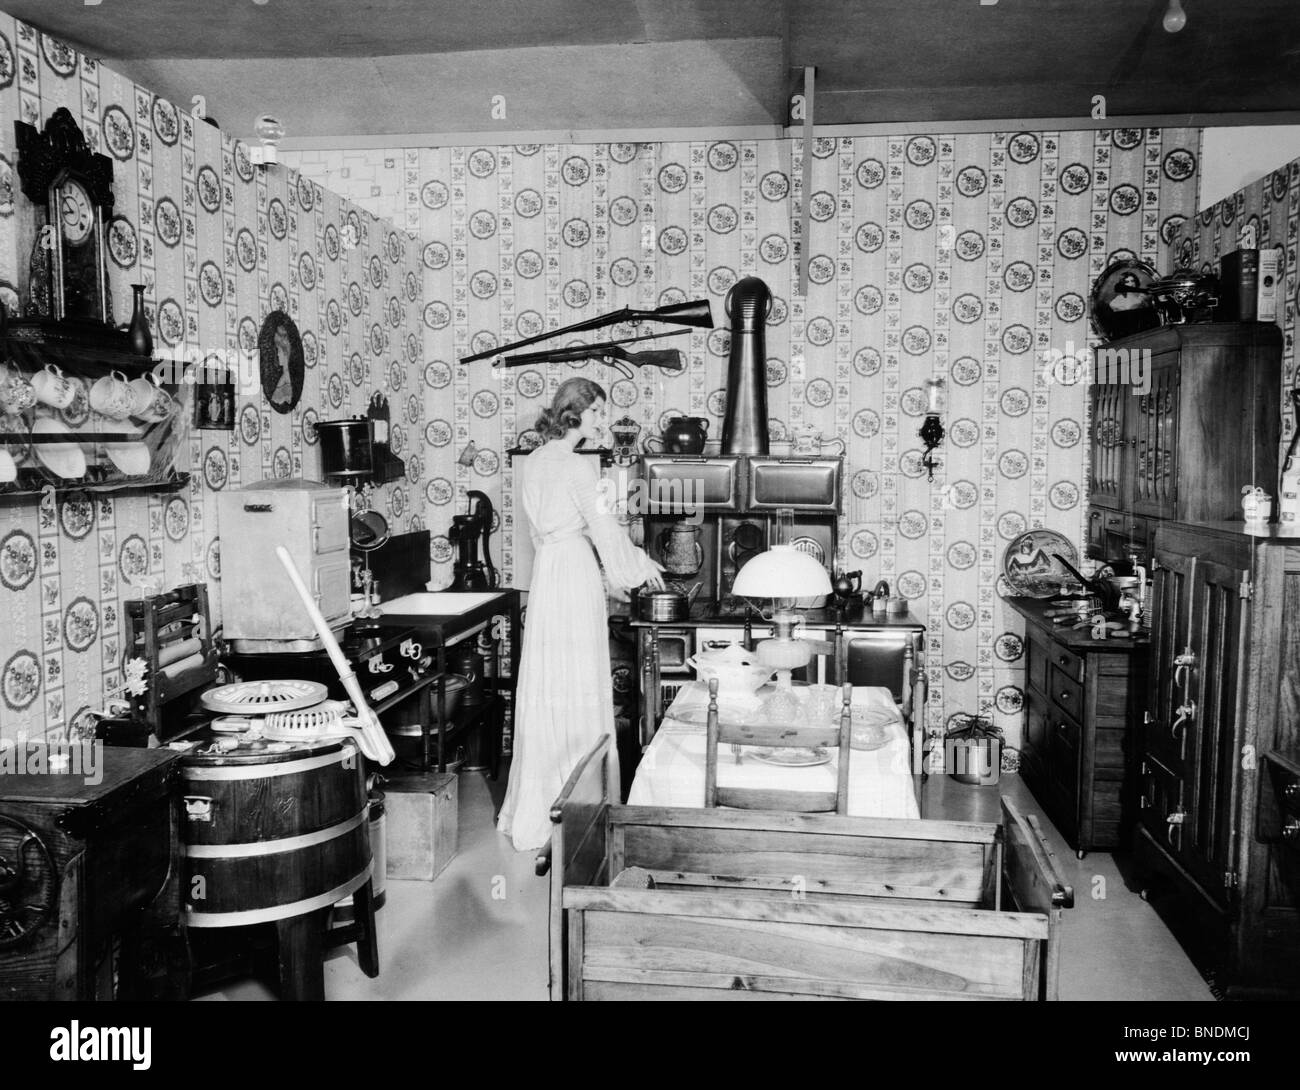 See Photos of The Pioneer Woman Test Kitchen